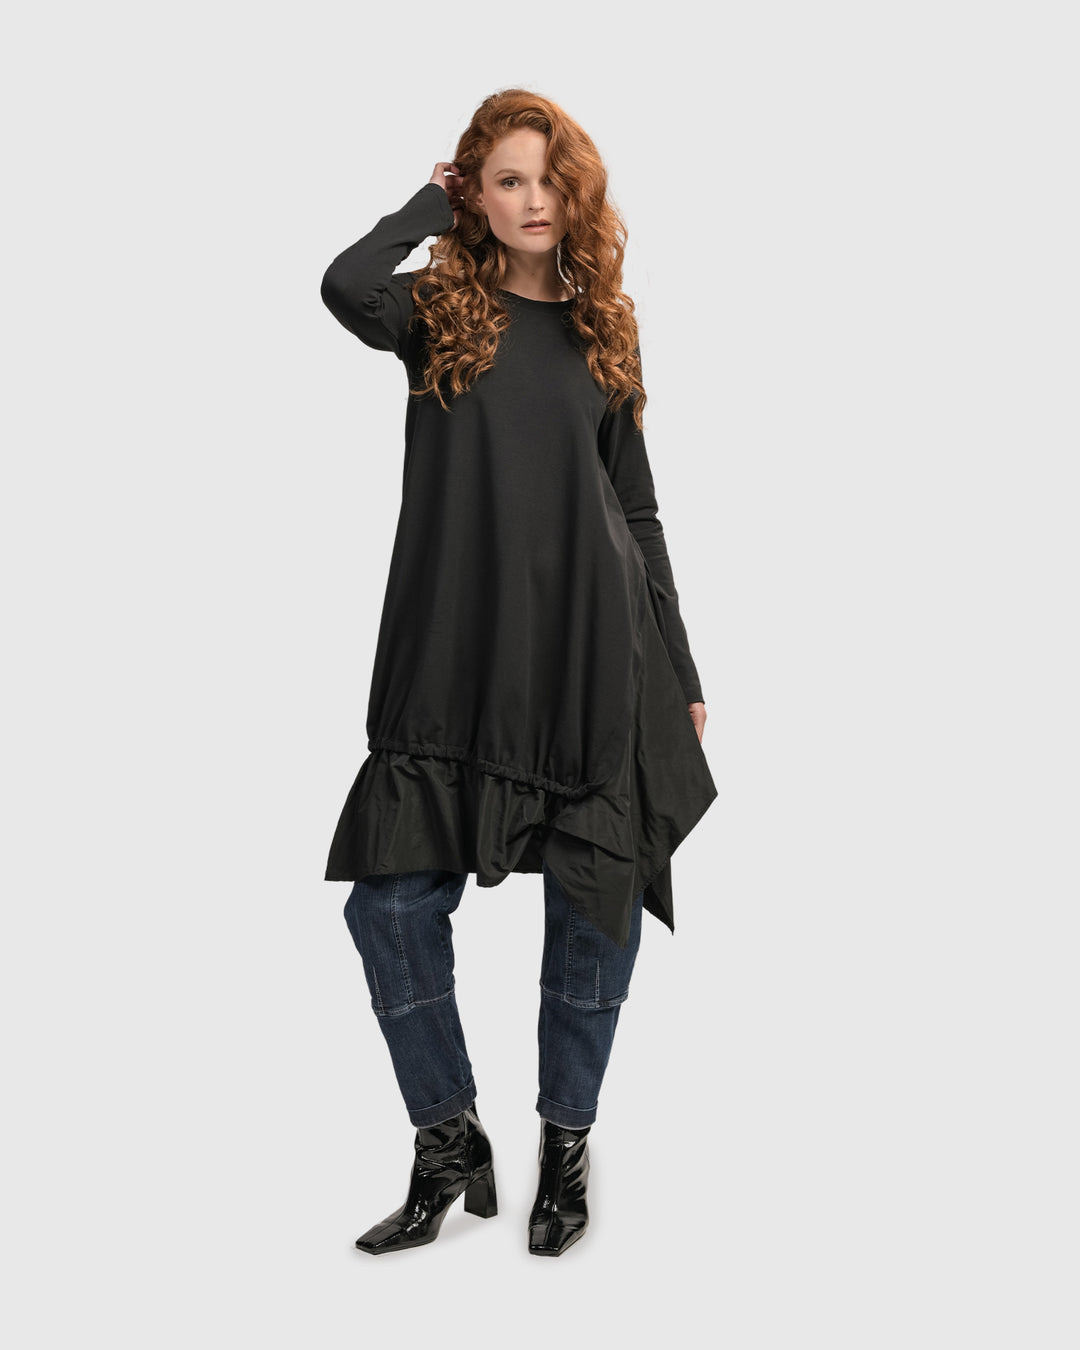 A woman wearing an ALEMBIKA Urban New Wave Tunic Top in Black with ruffles has a scoop neck and long sleeves.